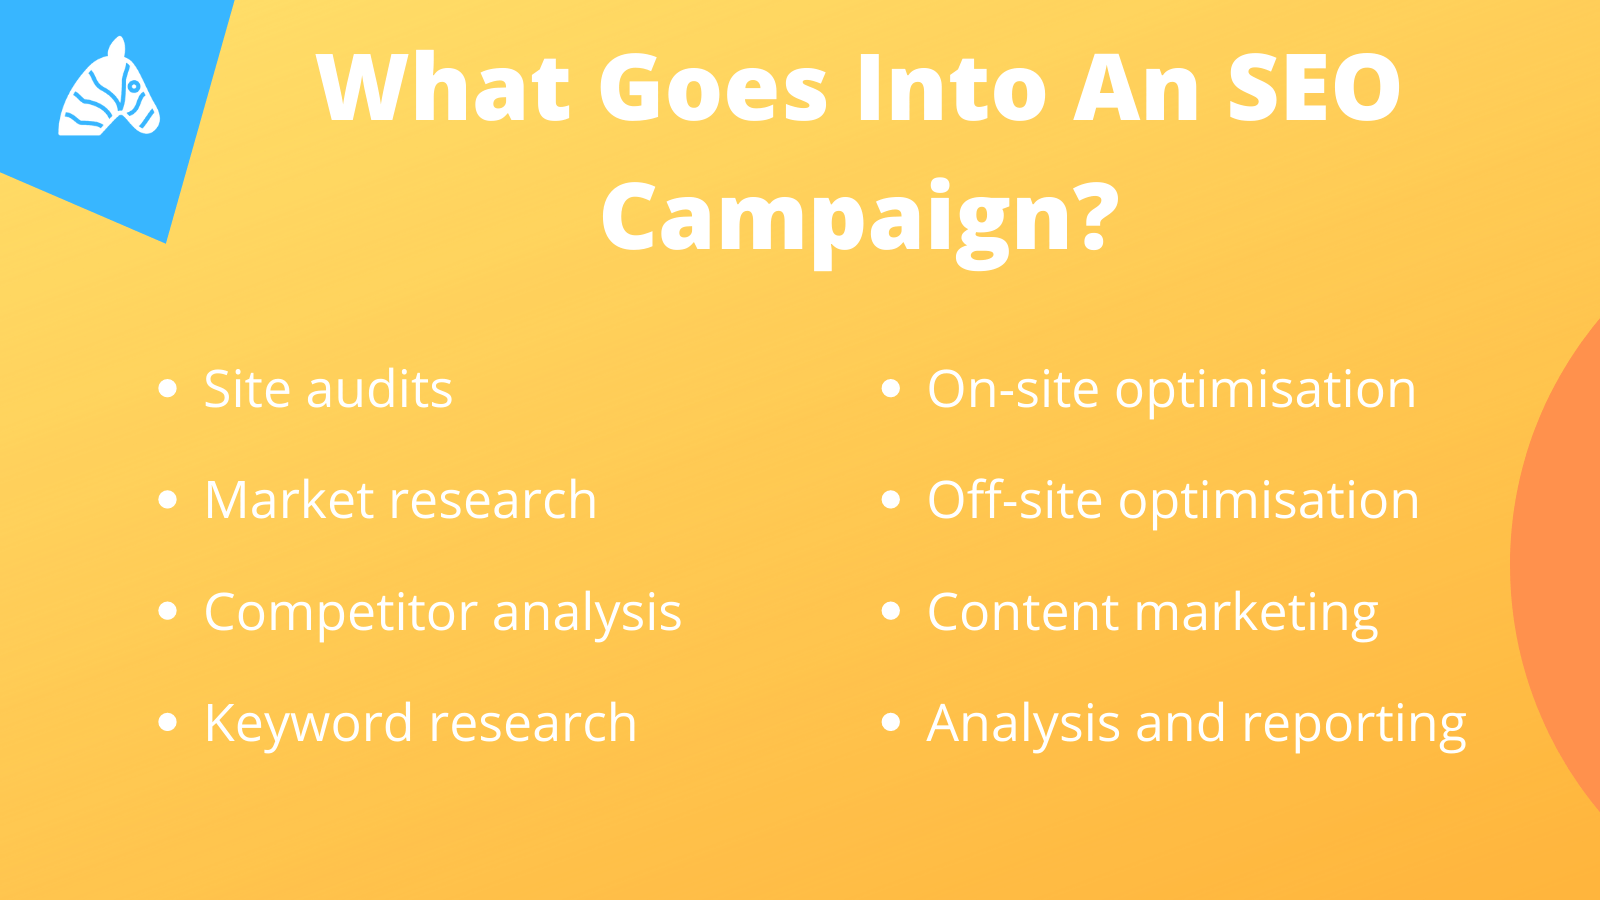 what is involved in an SEO campaign